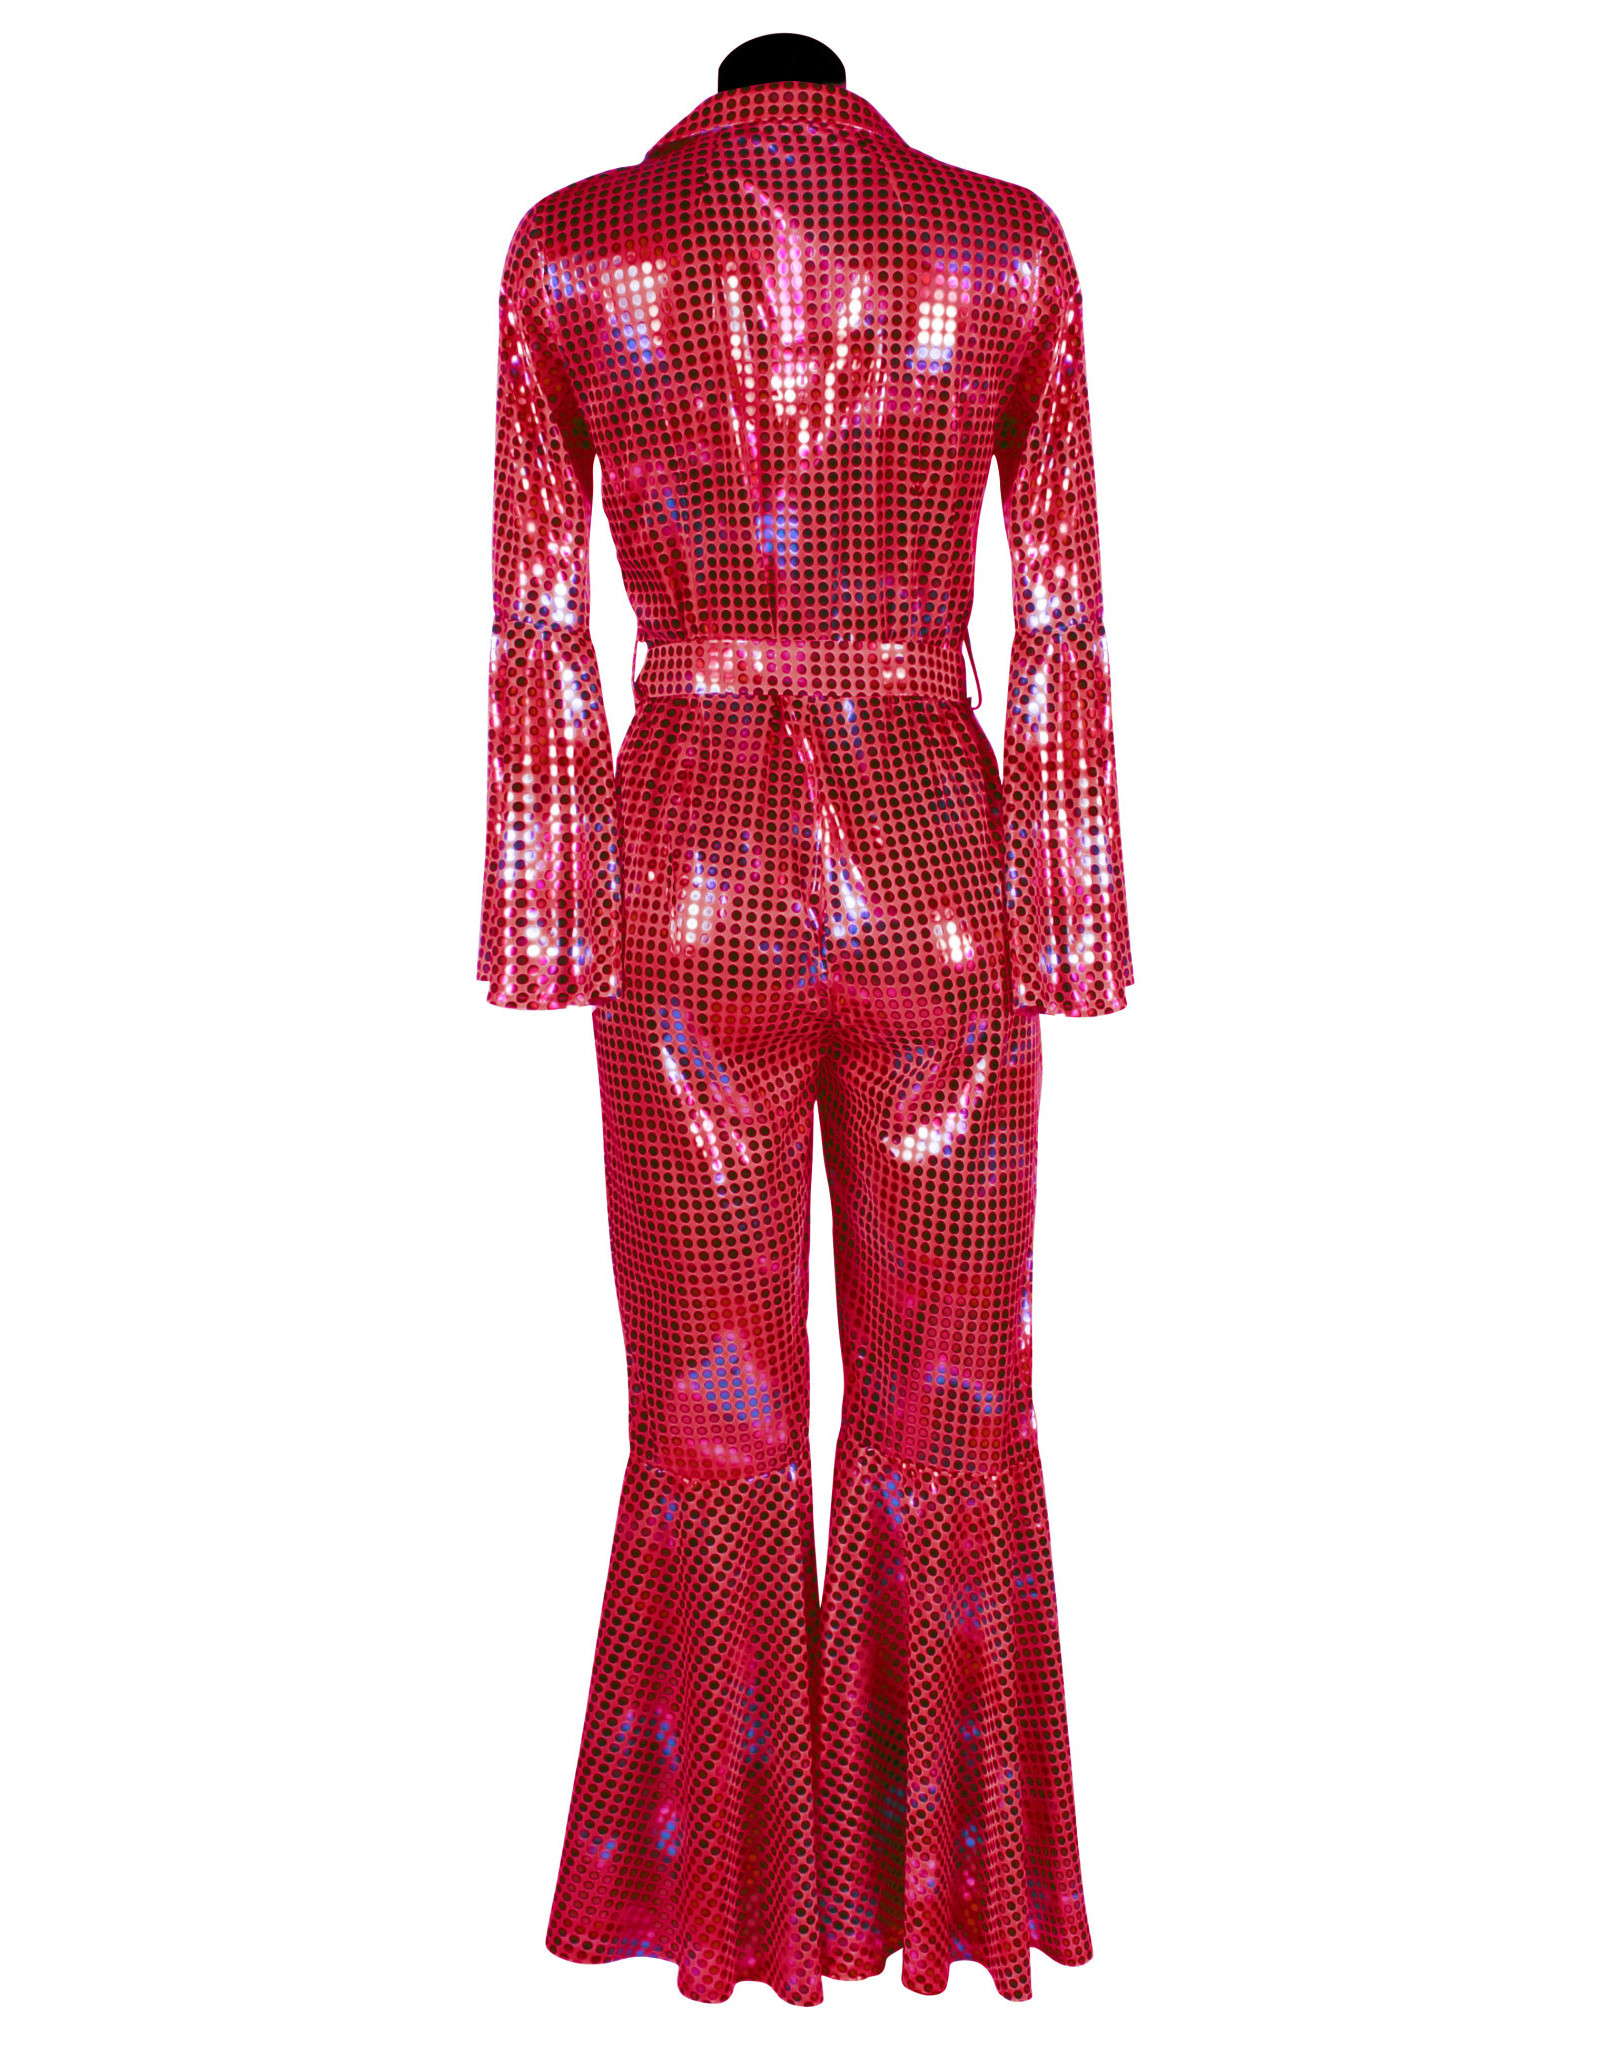 Catsuit "Disco", Rood